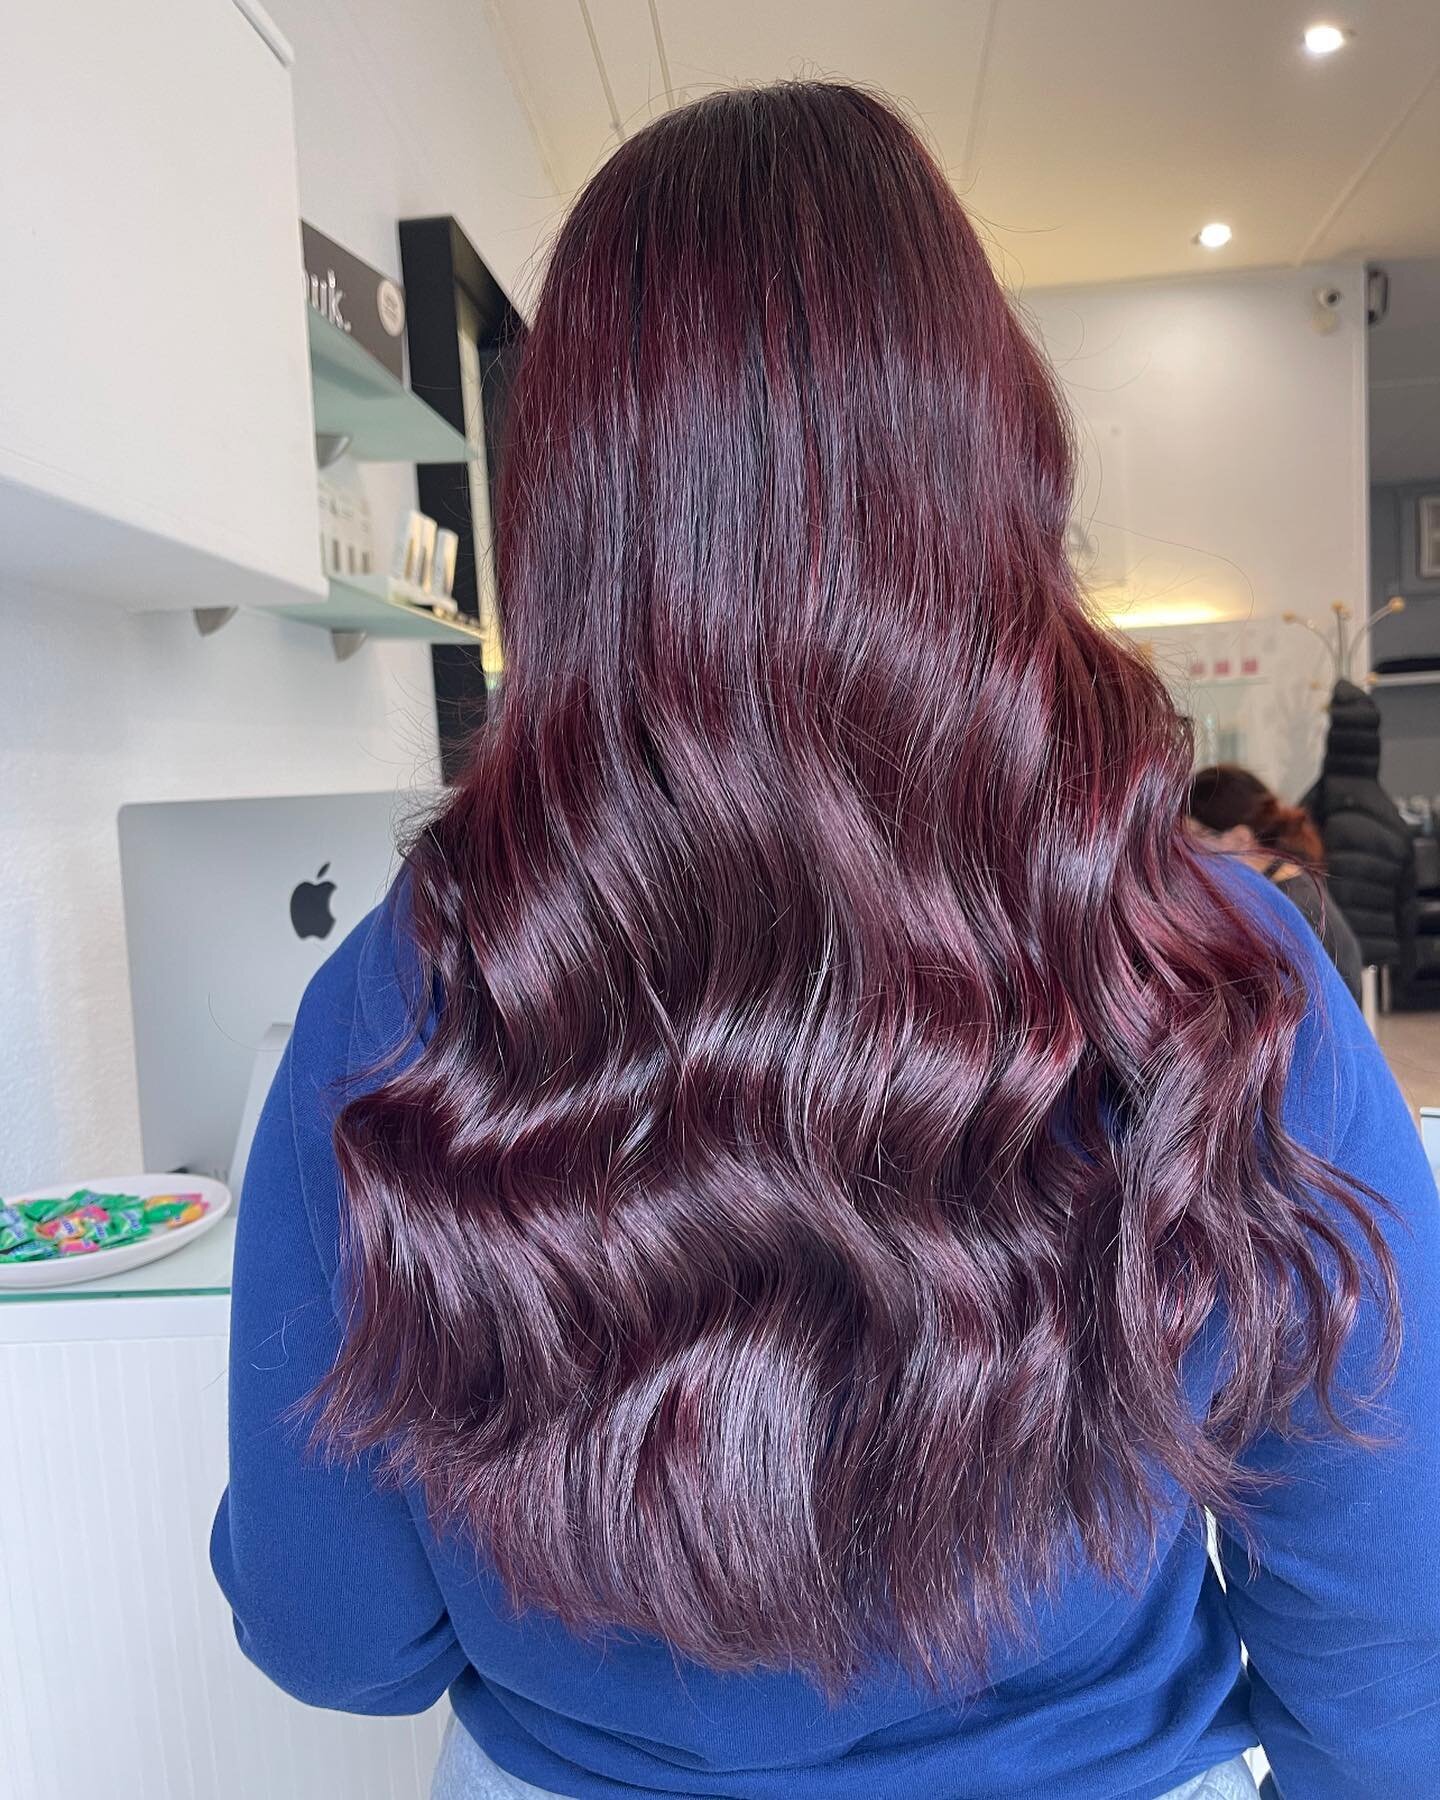 Loving these warmer burgundy browns for winter ❄️ created by Rocco. wella #wellaprofessional #wellahair #wellalife